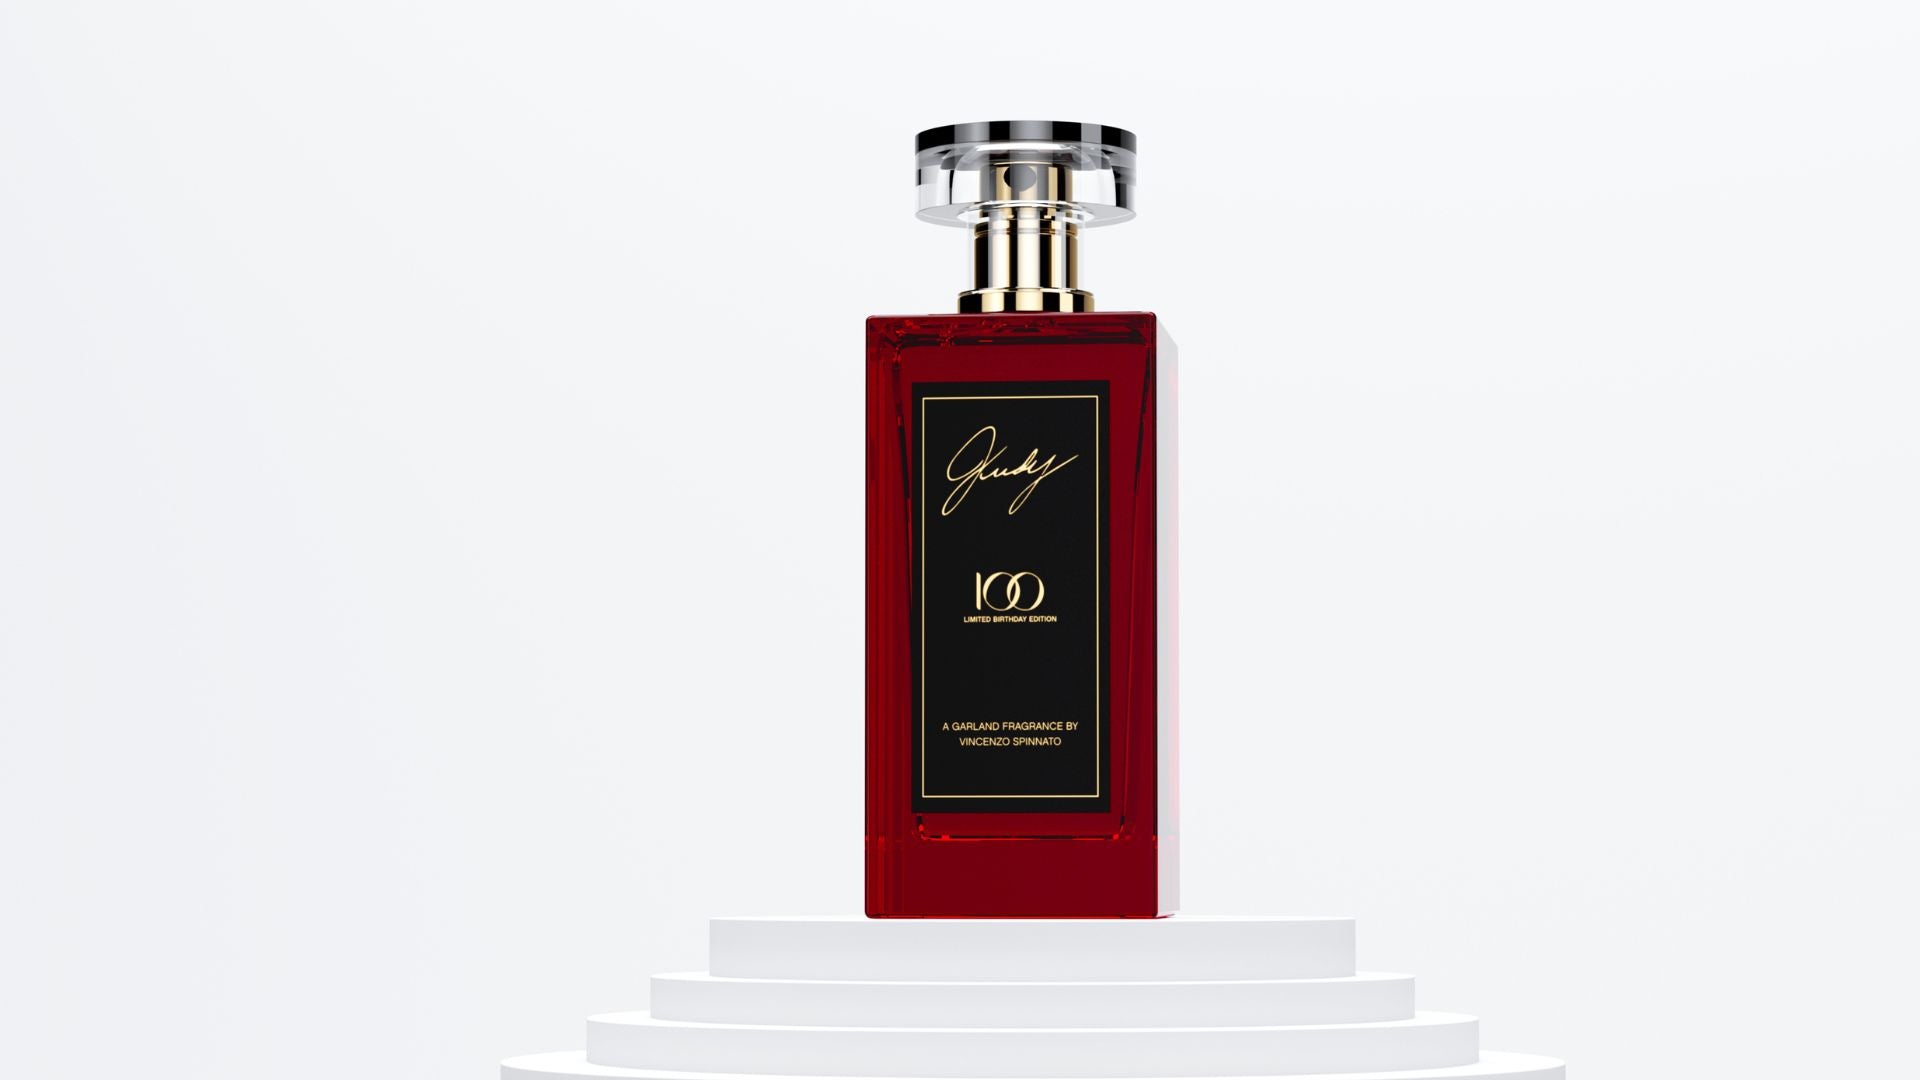 review, photos, ingredients, trends, fragrance, perfume, 2022, 2023, judy garland fragrance, limited edition, vince spinnato, oriental, amber, rich florals, spicy gourmands